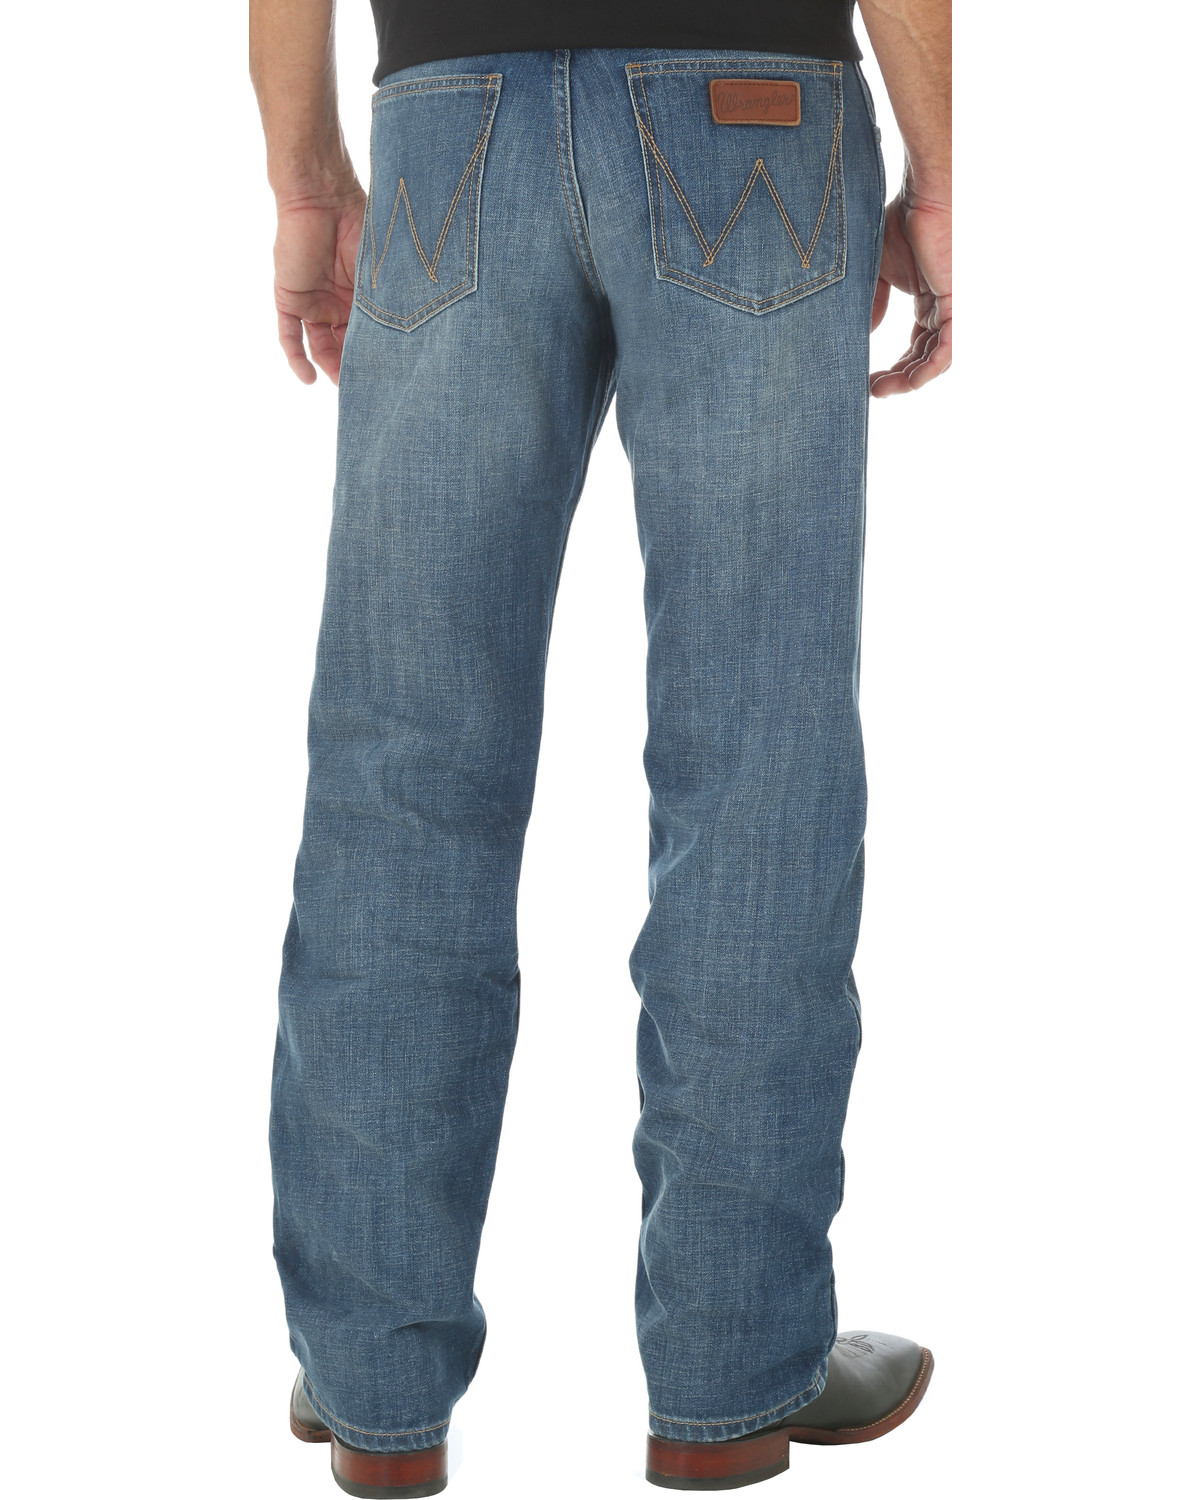 Wrangler Retro Men's Relaxed Fit Straight Leg Jeans - Big and Tall ...